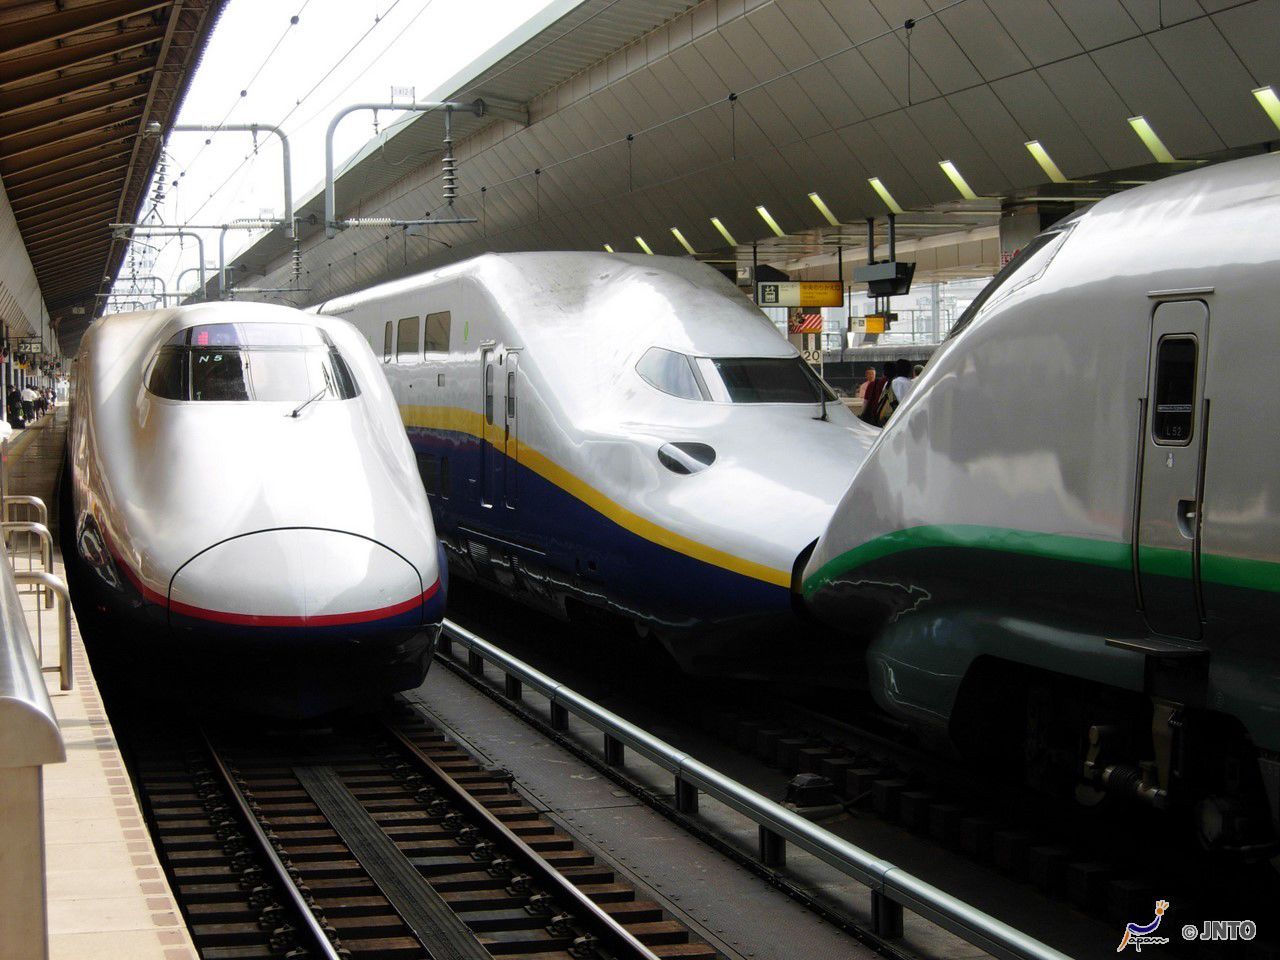 It has 14 lines, including the Tokaido Shinkansen, the most heavily used high-speed rail route in the world.